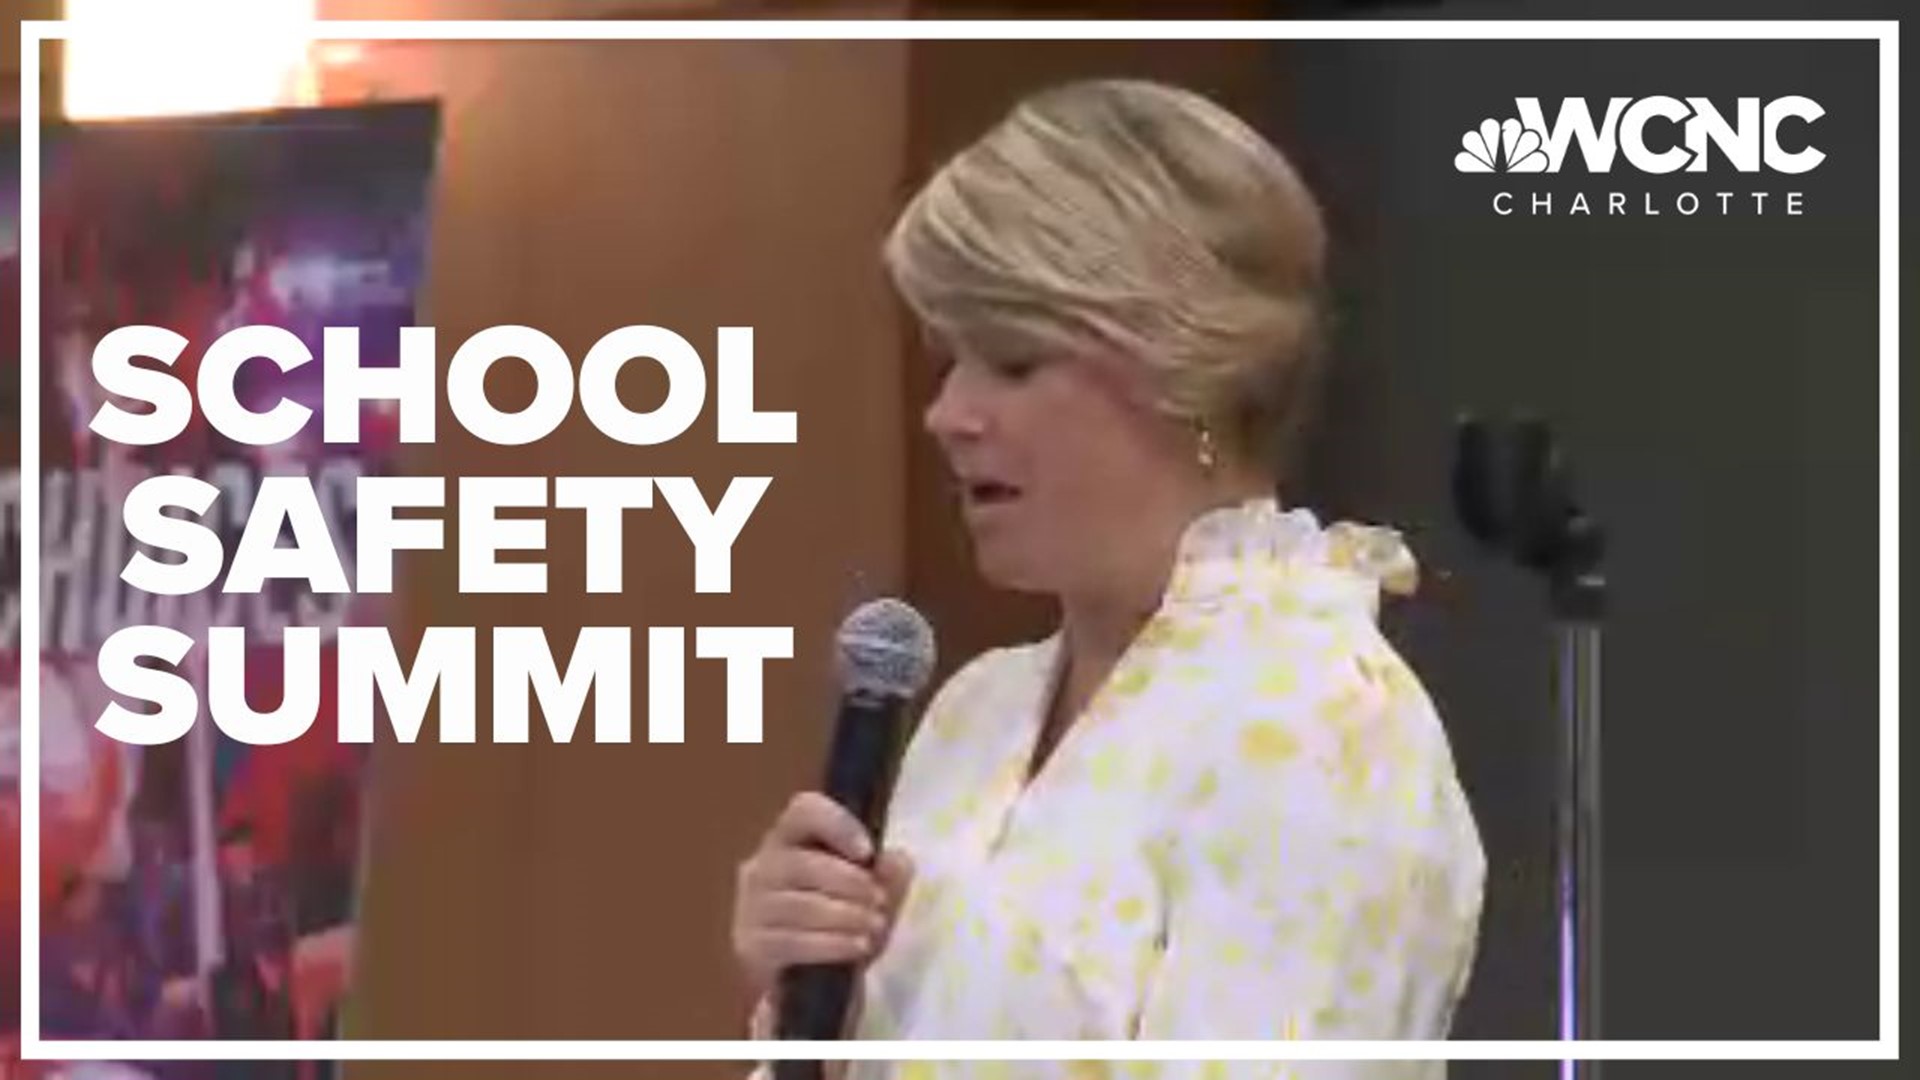 With the new school year just weeks away, North Carolina's school safety experts gathered in Gaston County today to discuss solutions to the rise in school violence.